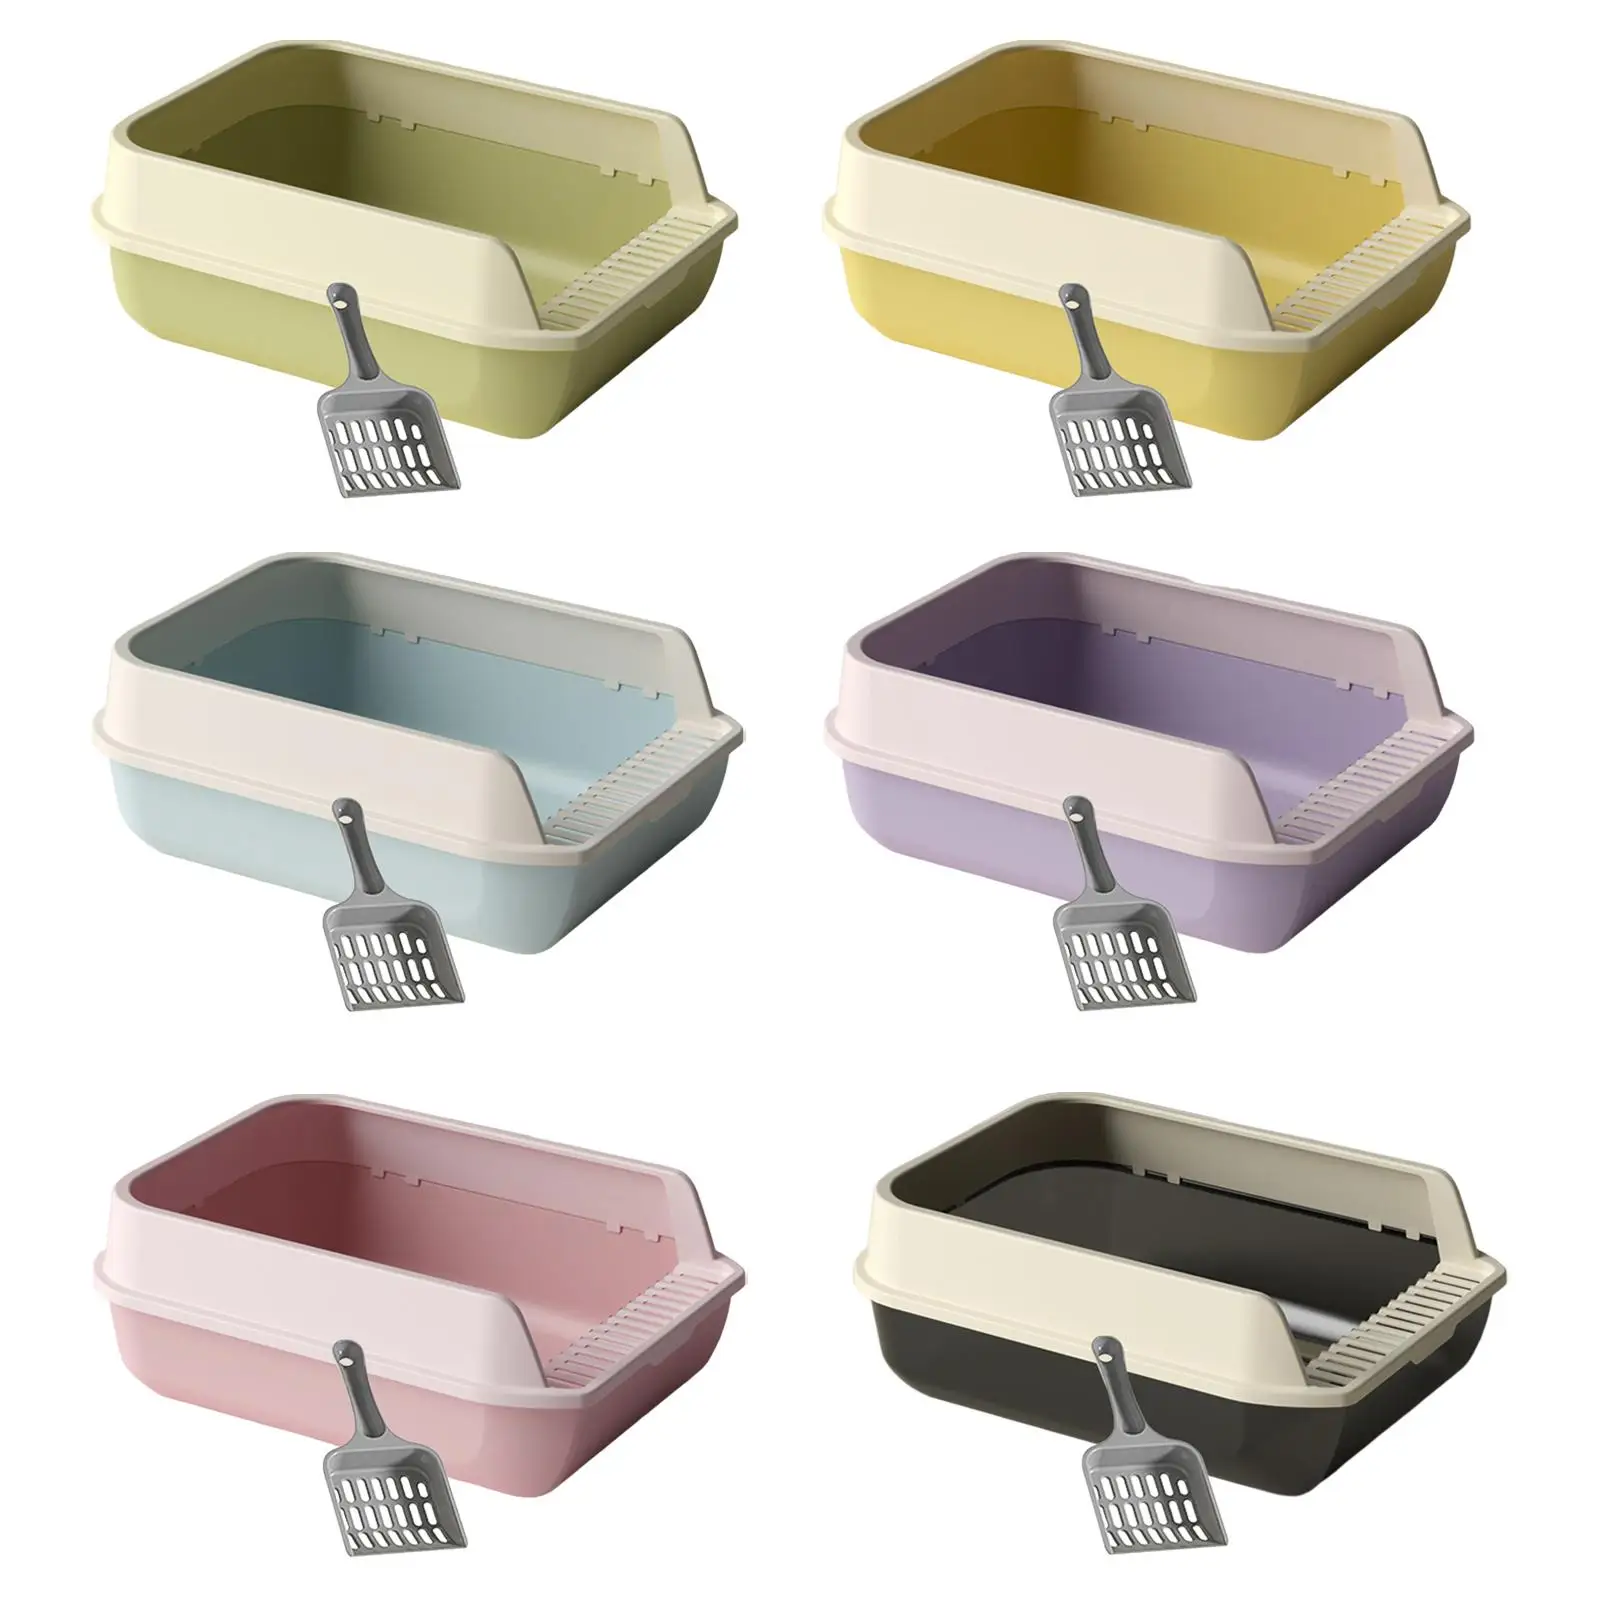 Cat Litter Box High Sided Cat Sand Box Container Portable Semi Closed Potty Toilet for Small Animals Indoor Cats Pet Accessories